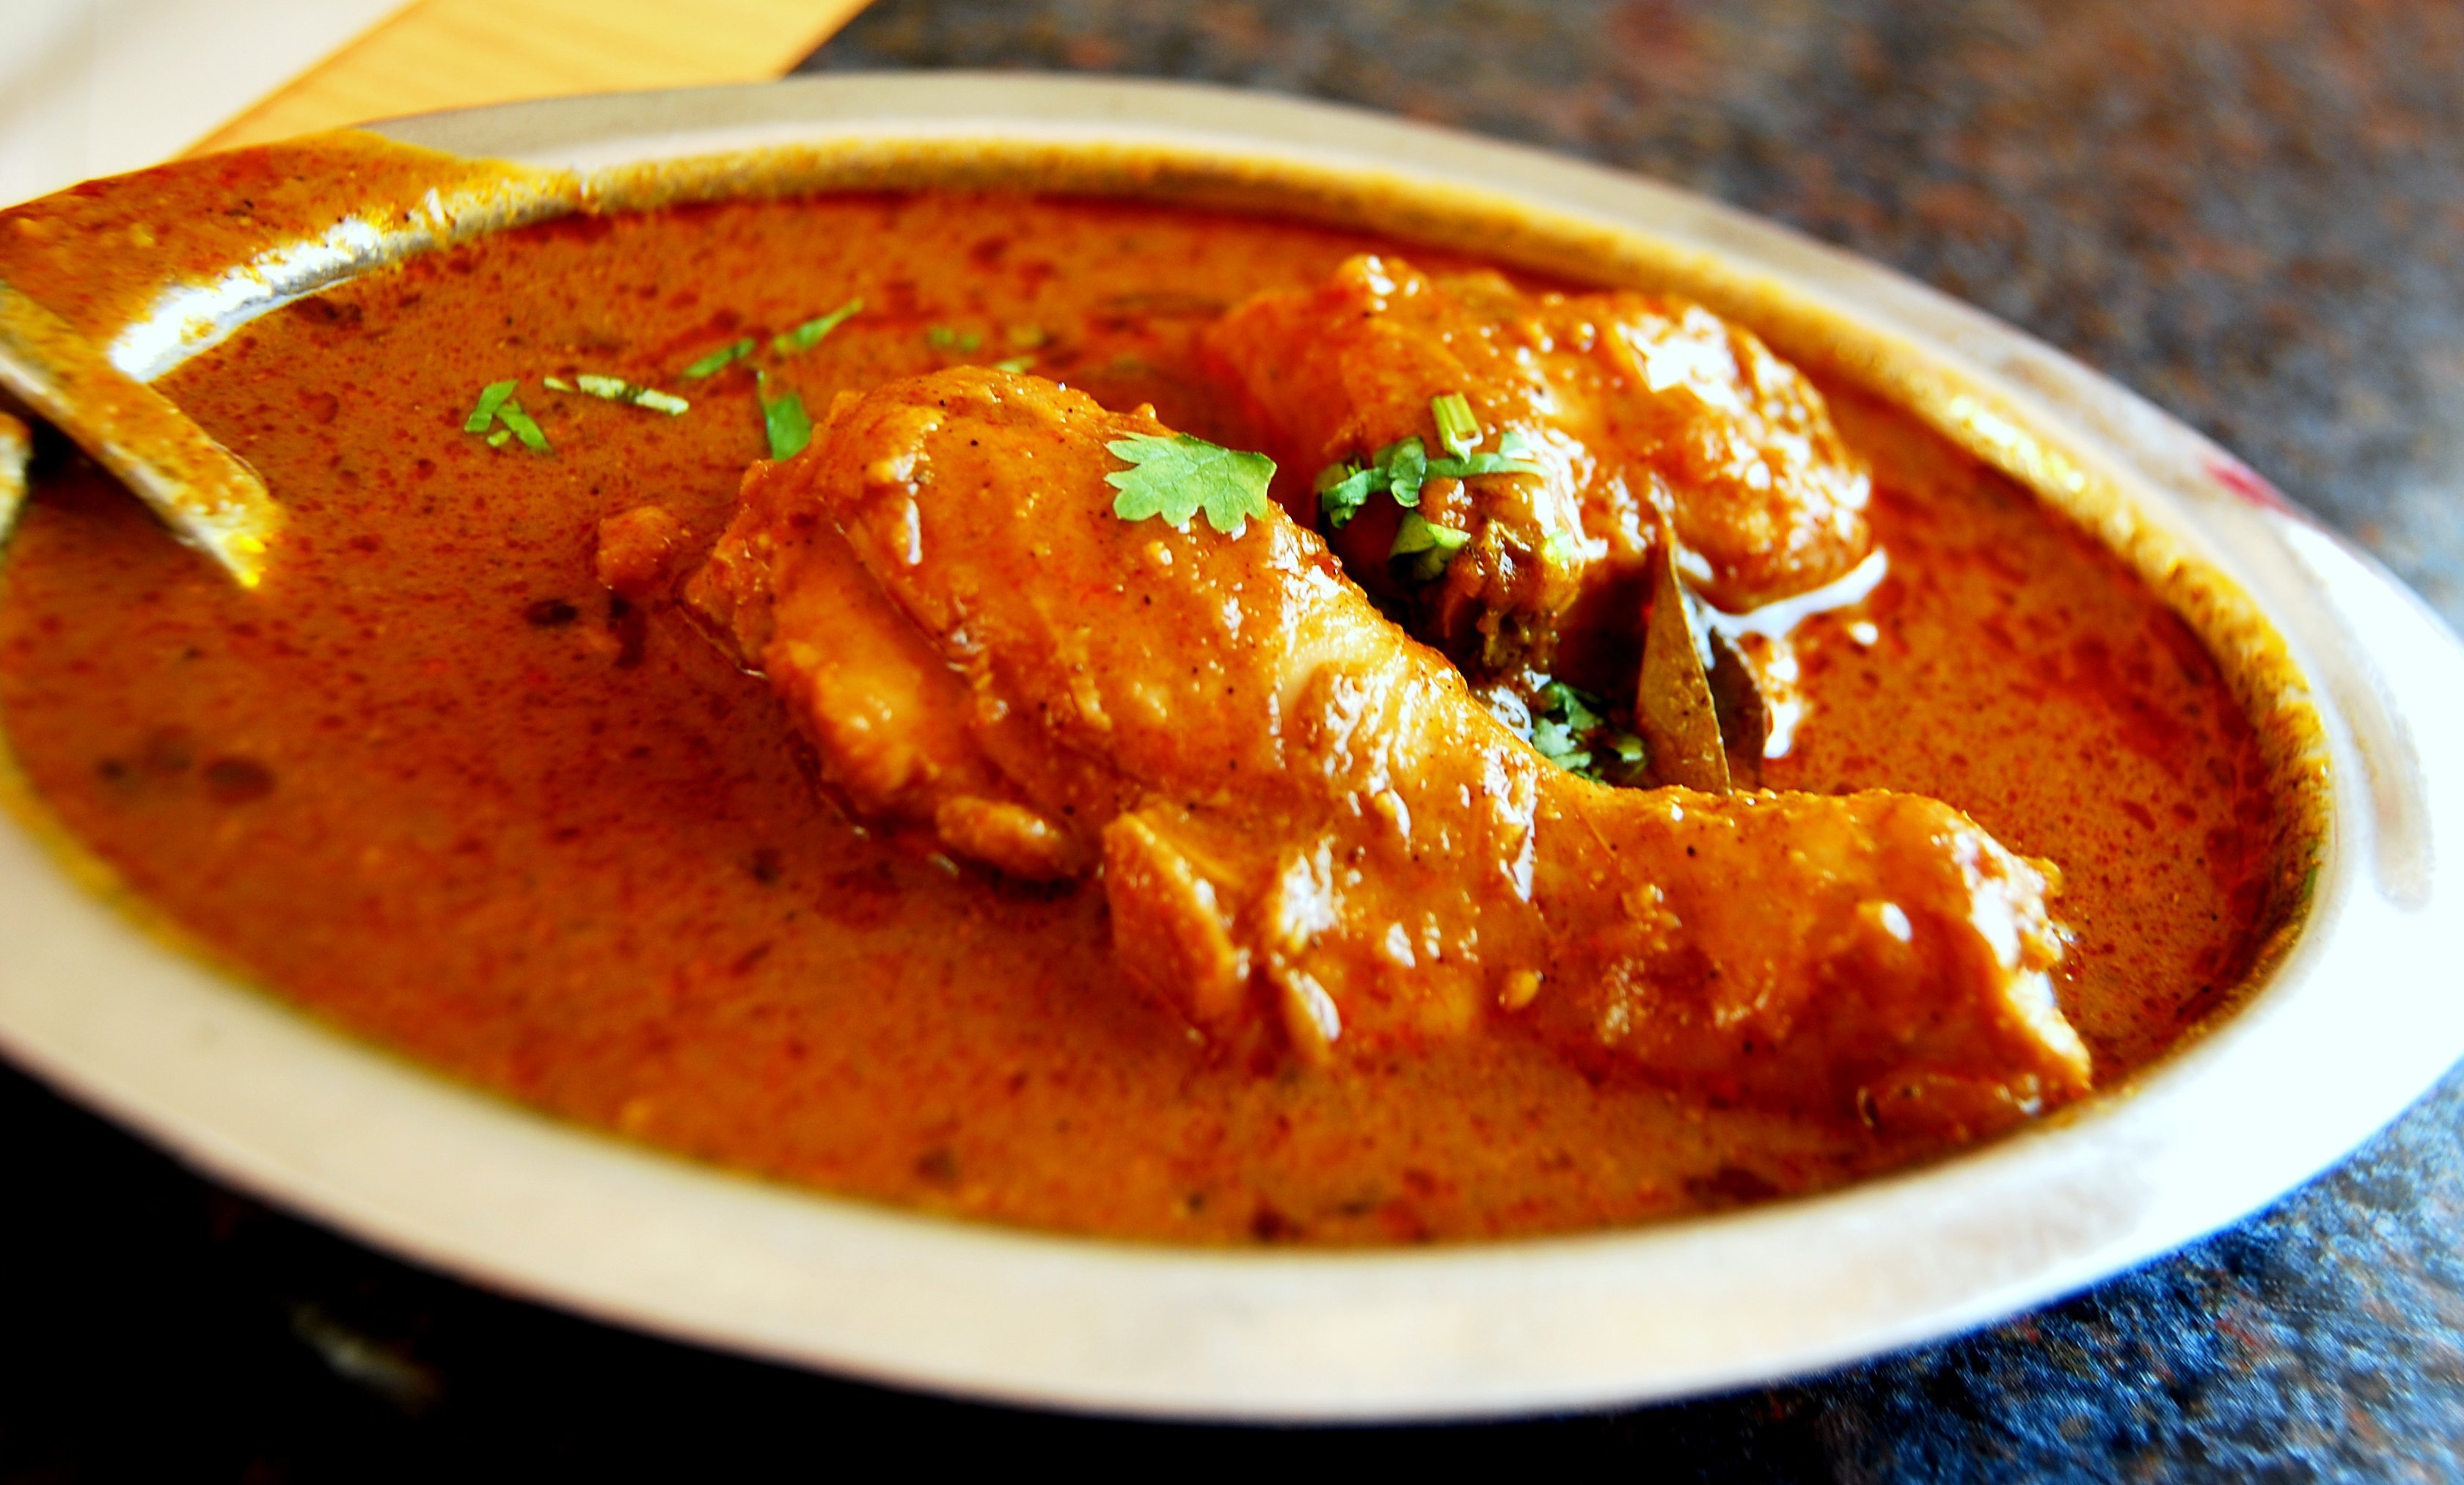 22 Non-Vegetarian Dishes From South India That Will Make You Go 'Mmmm!'